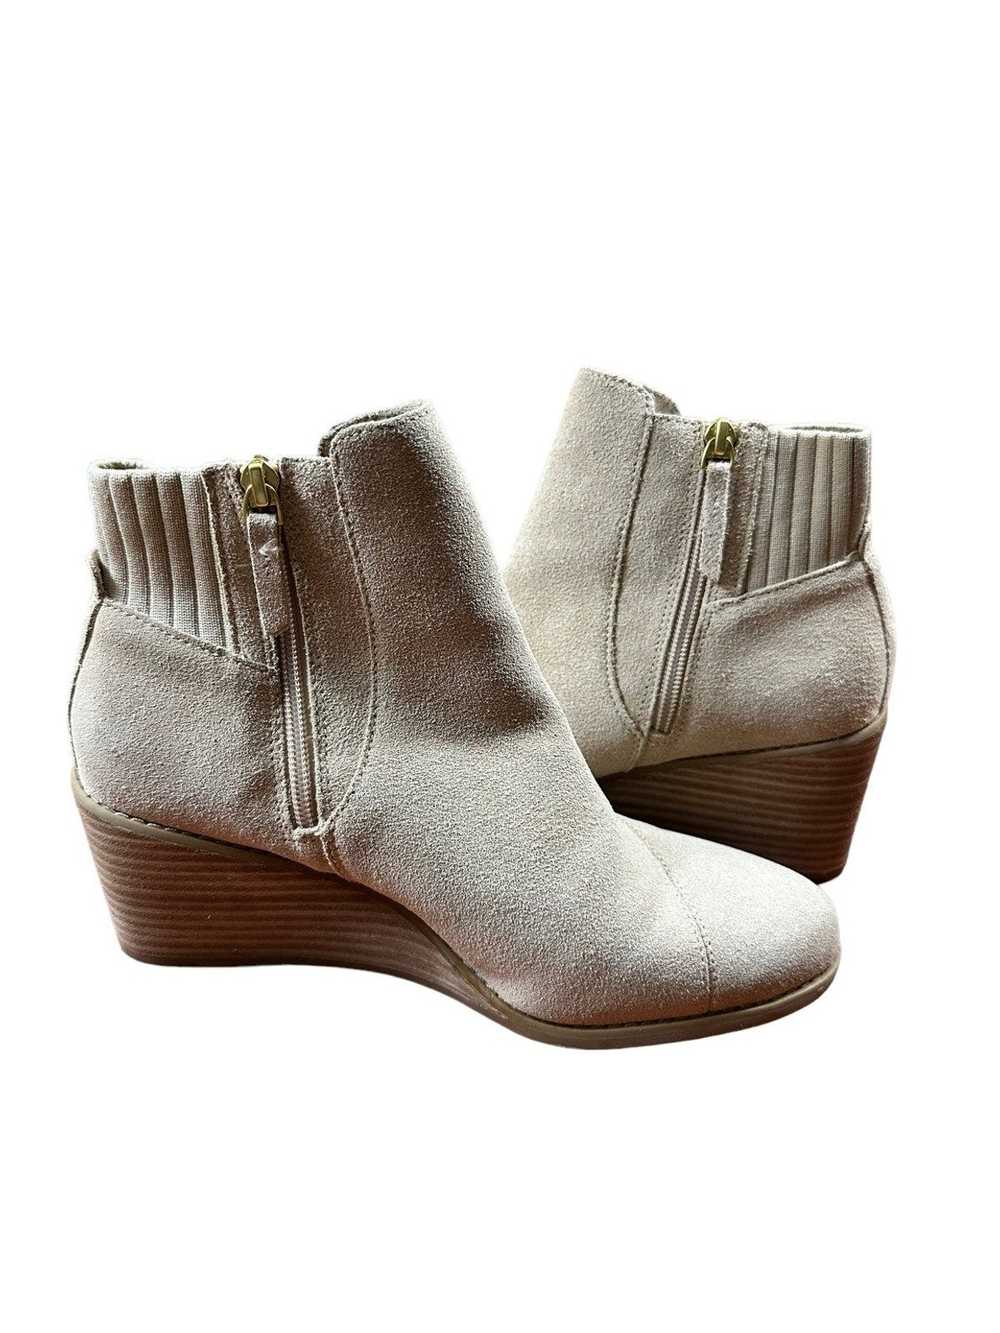 Toms Toms Sadie Boot wedge ankle bootie suede SZ-9 - image 5